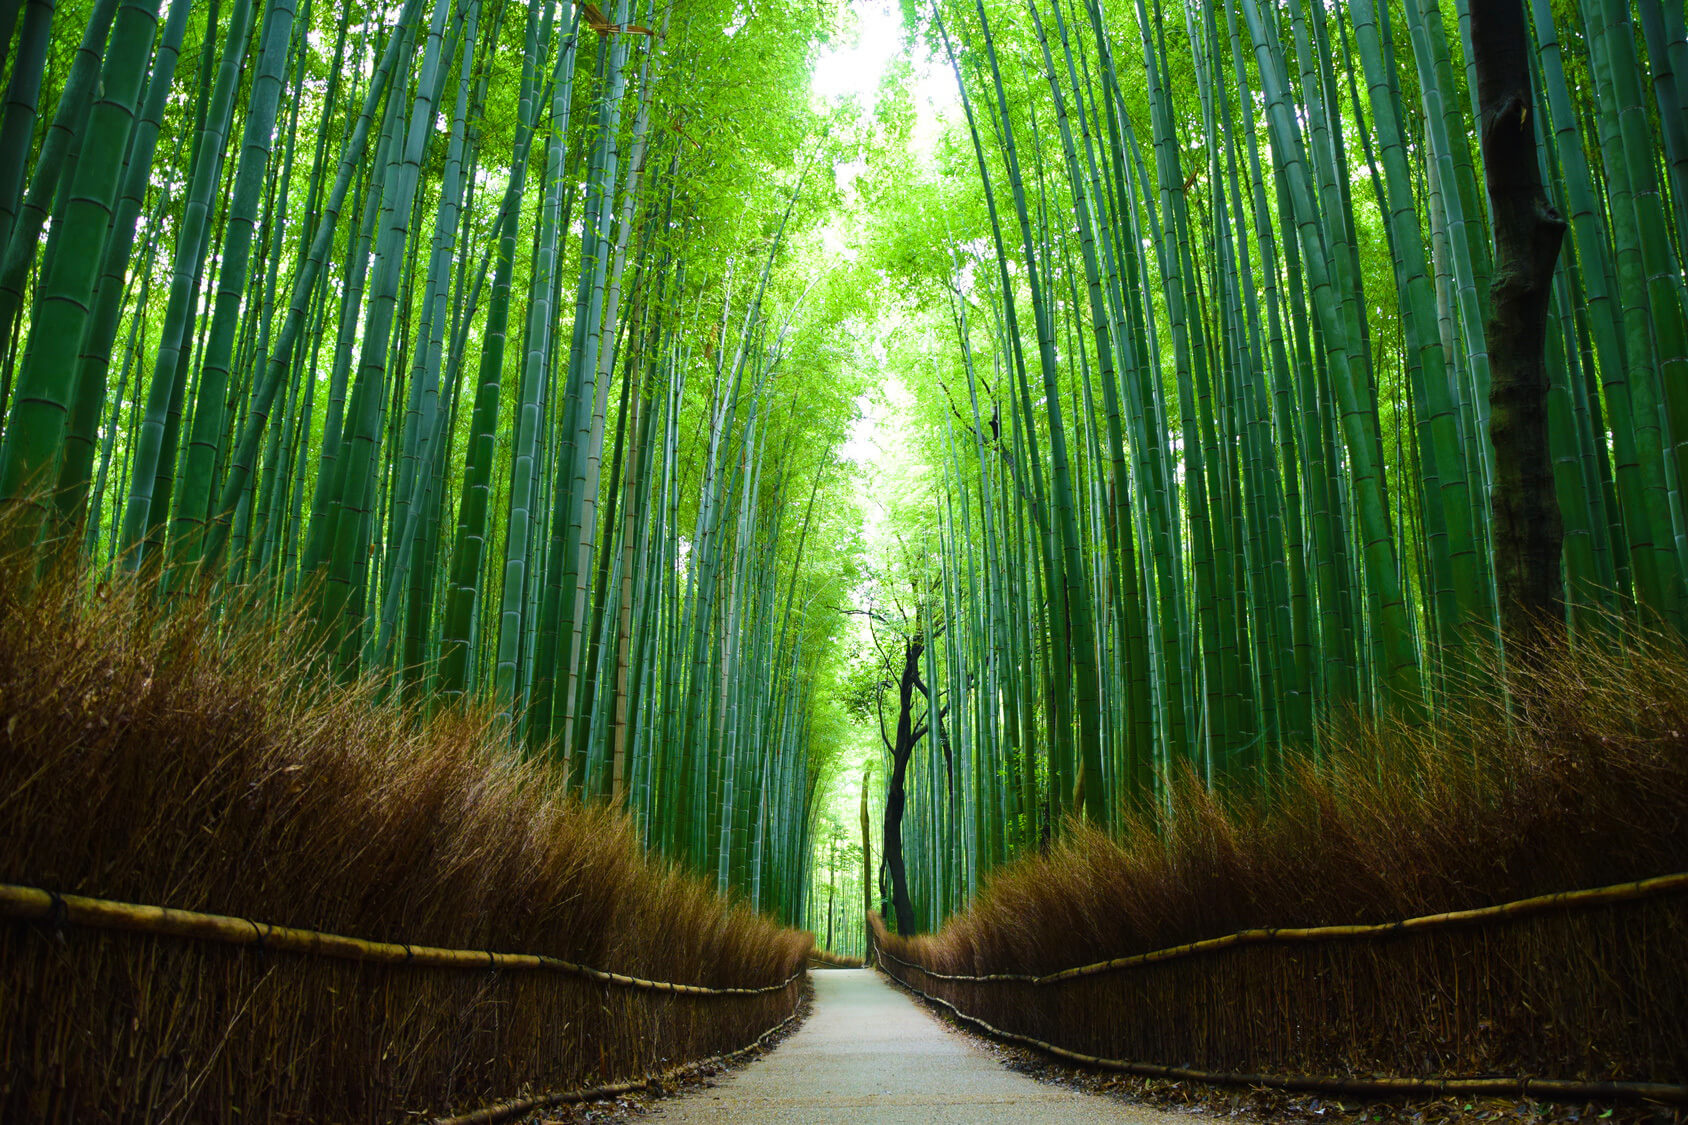 Natural Sites to Discover in the World - Arashiyama Bamboo Forest, Japan